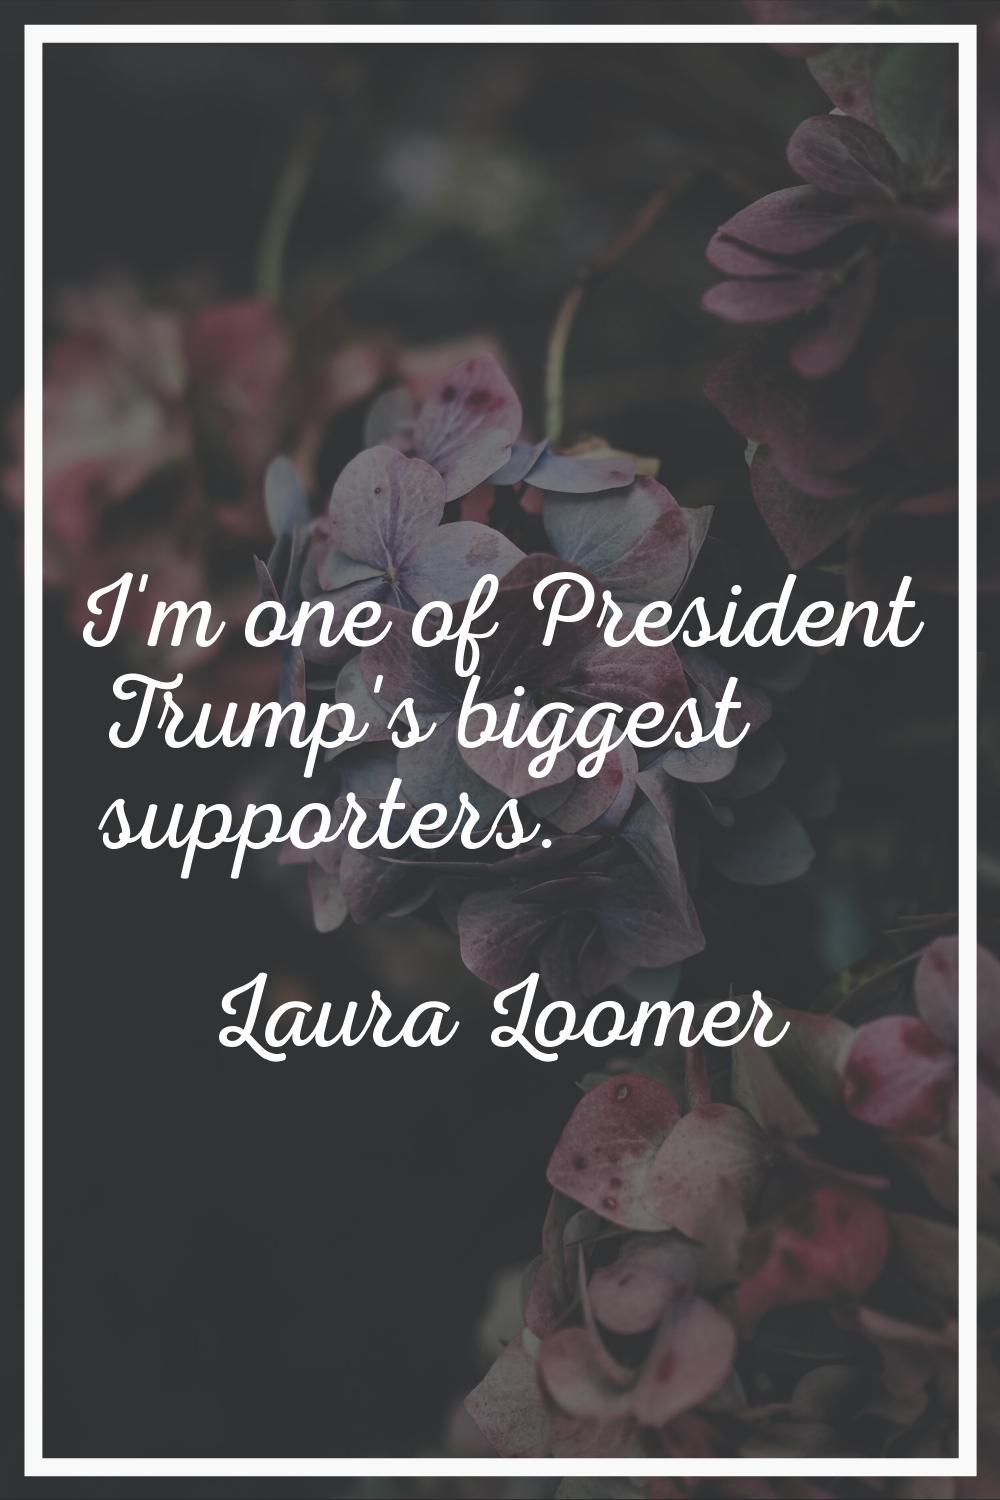 I'm one of President Trump's biggest supporters.